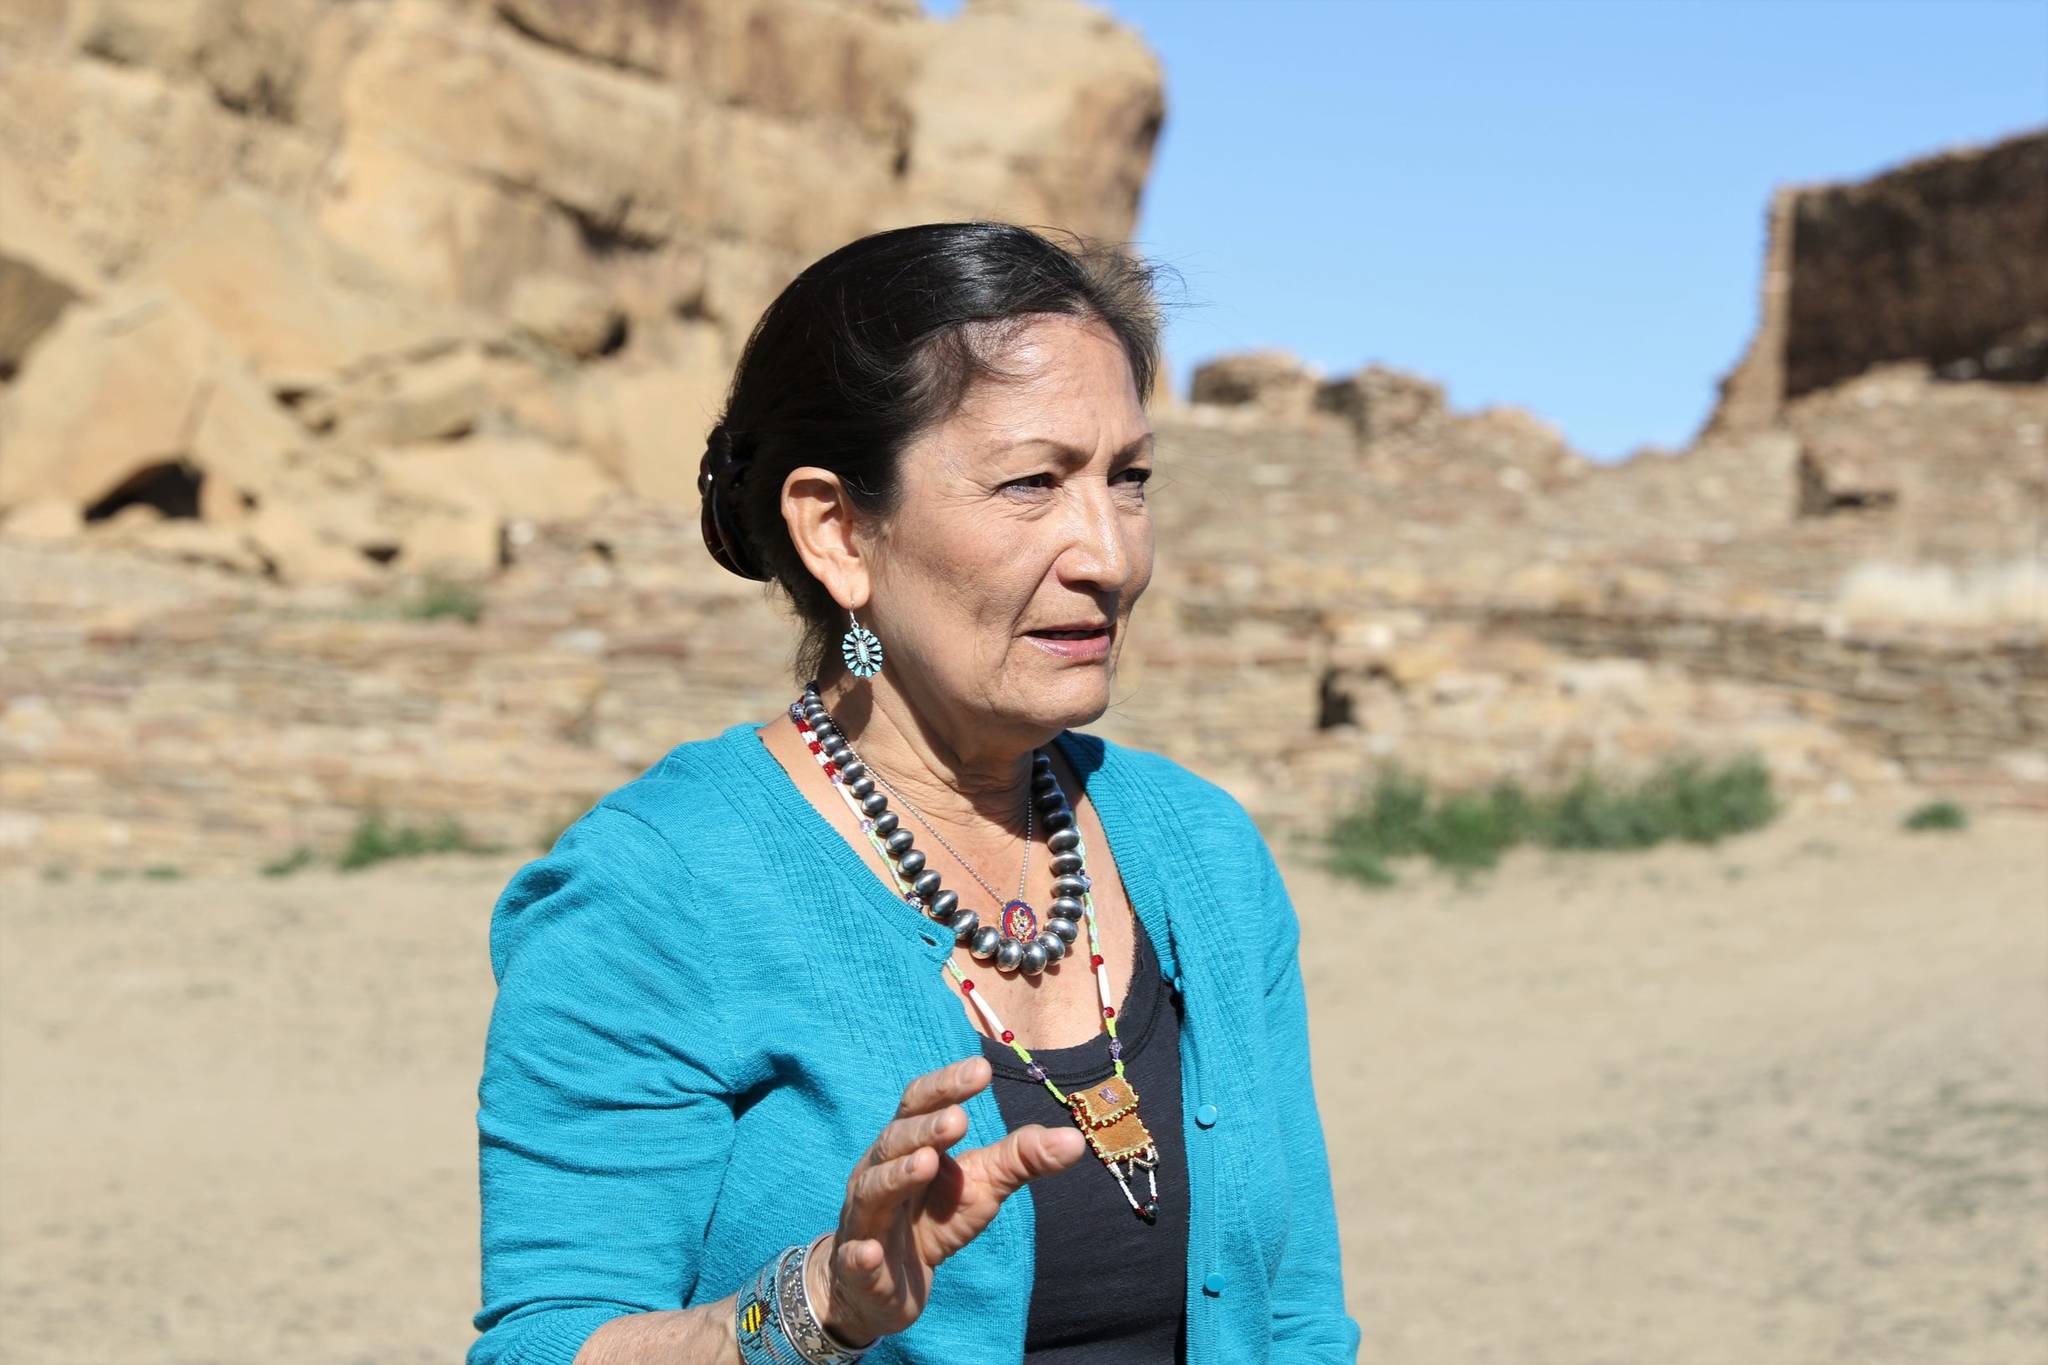 File Photo
U.S. Rep. Deb Haaland, D-NM,has served on the House Natural Resources Committee, which oversees the Interior Department, for two years.